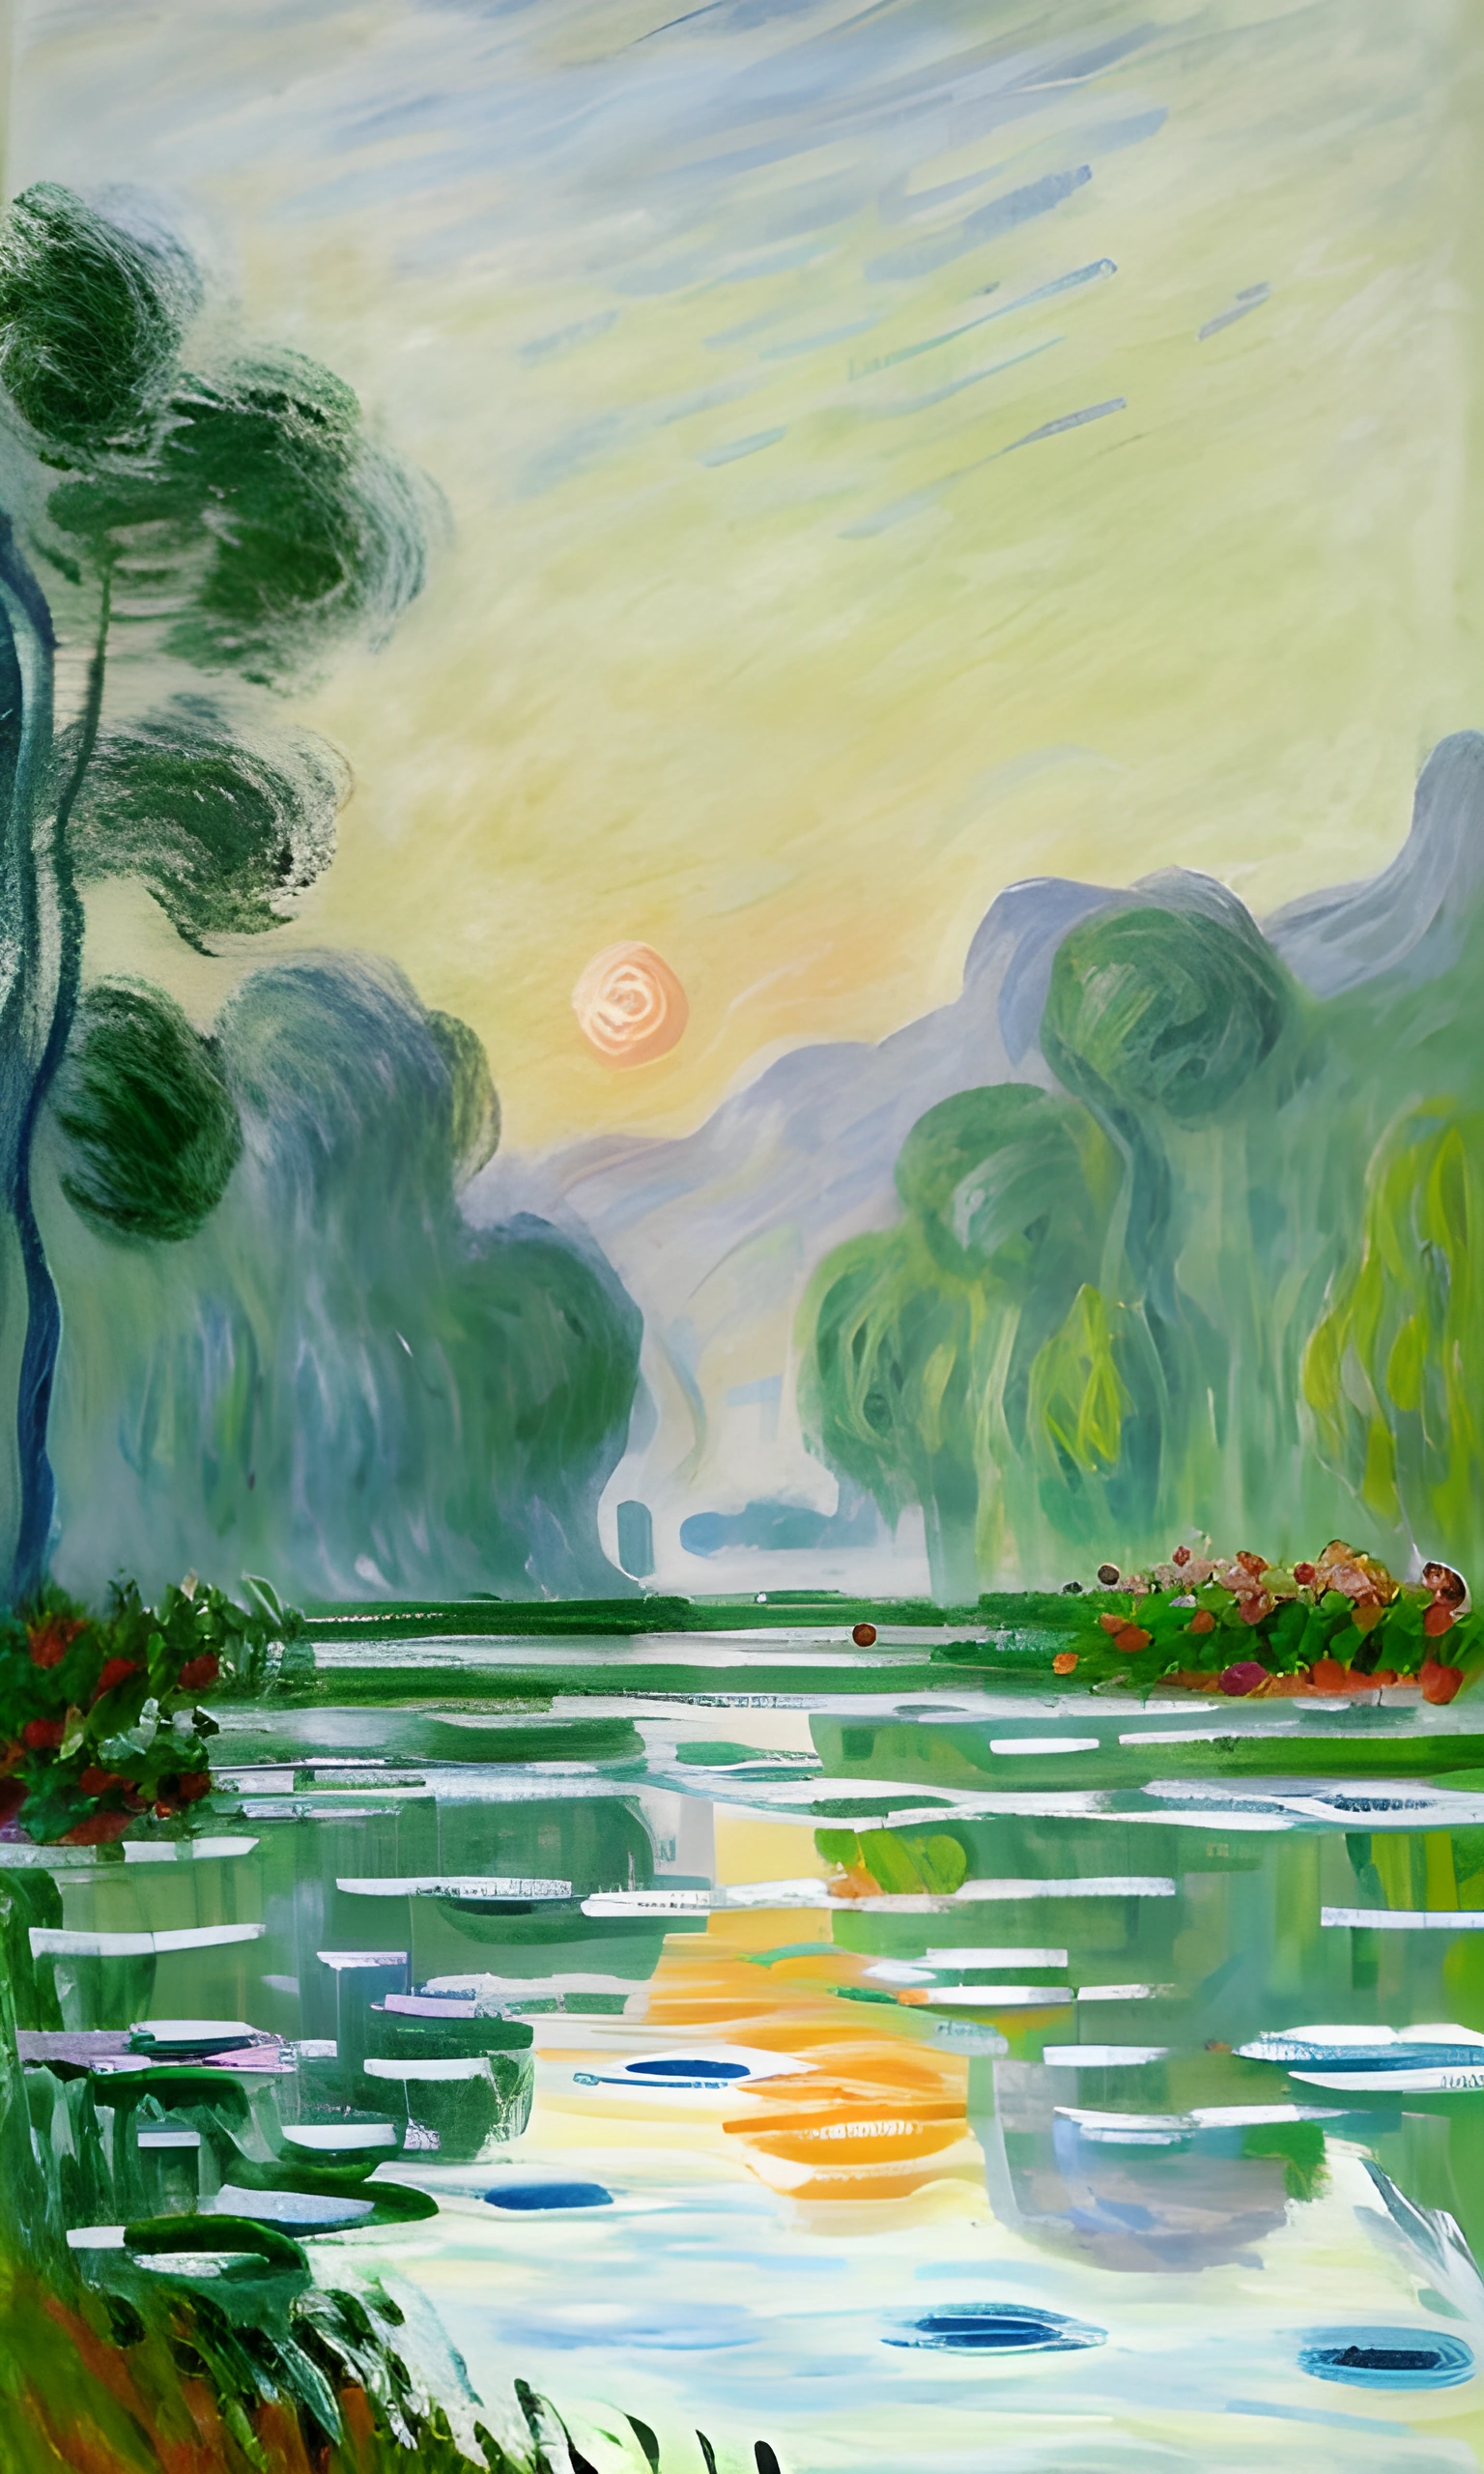 painting of a river with trees and a sunset in the background